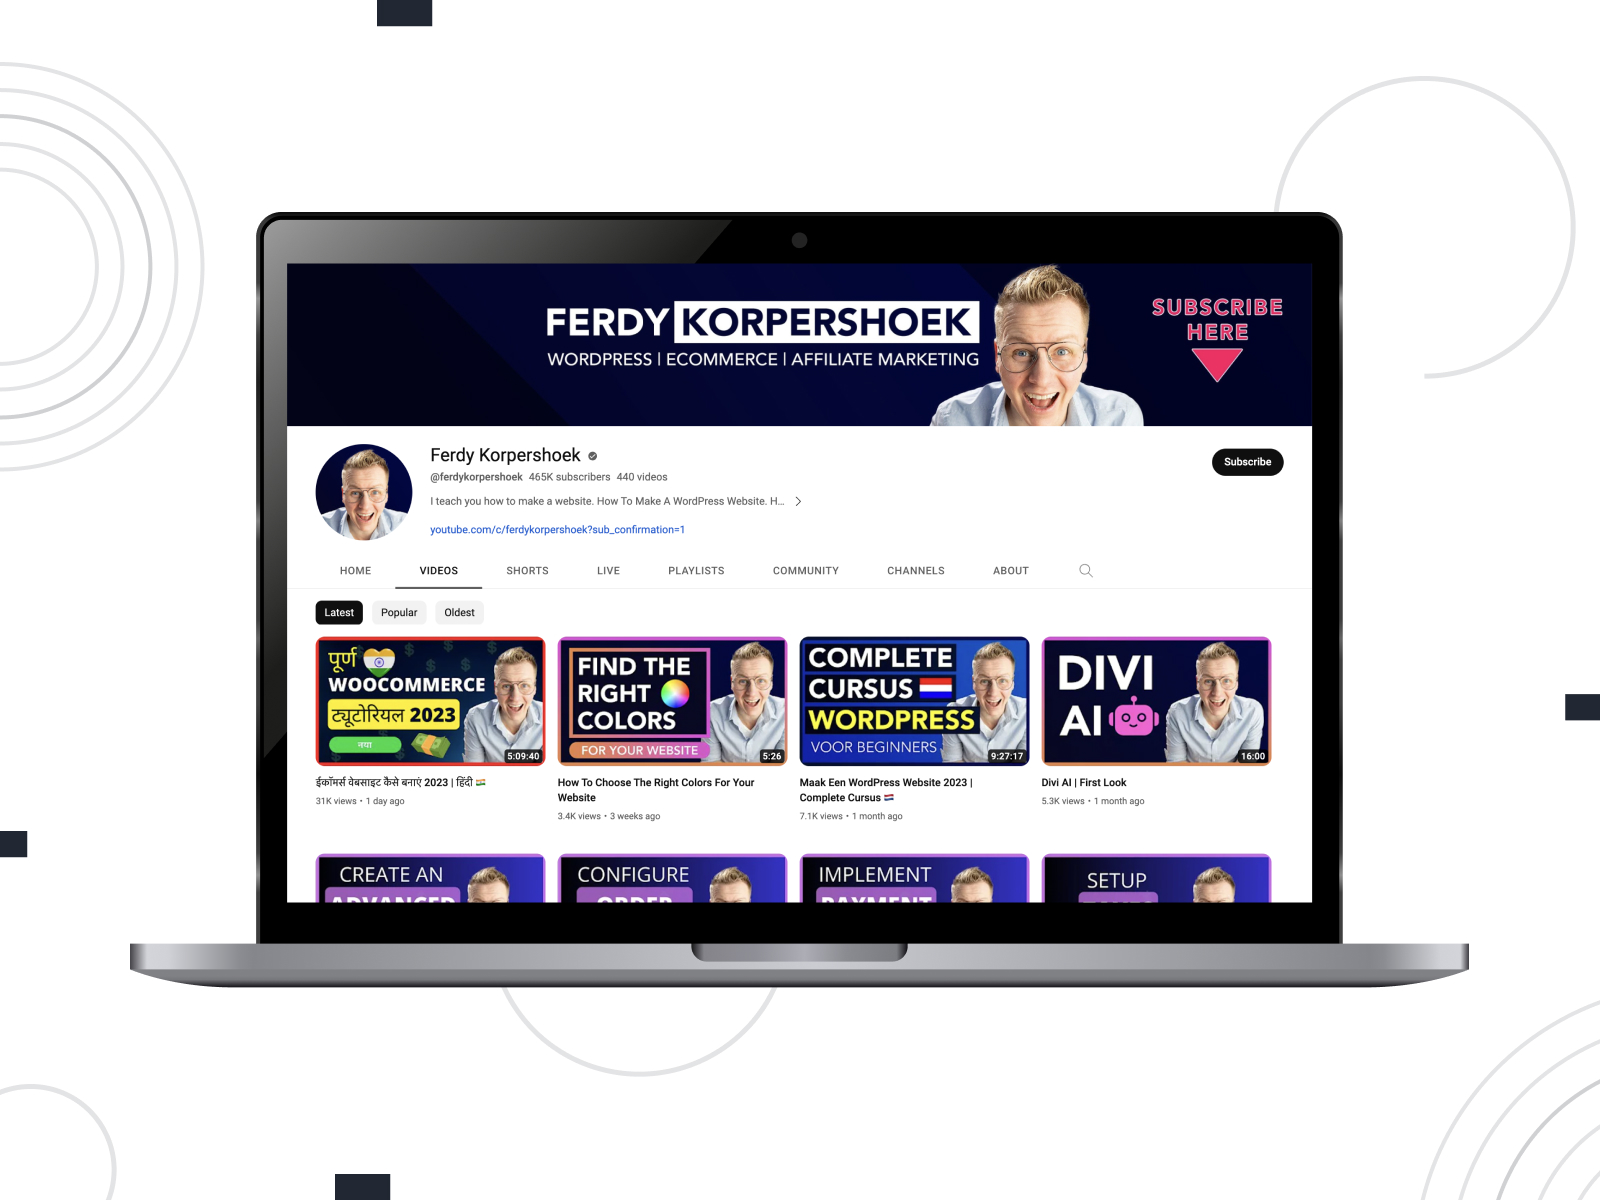 View of Ferdy Korpershoek, a channel designed to help everyone build a noticeable WordPress website with popular plugins and themes.